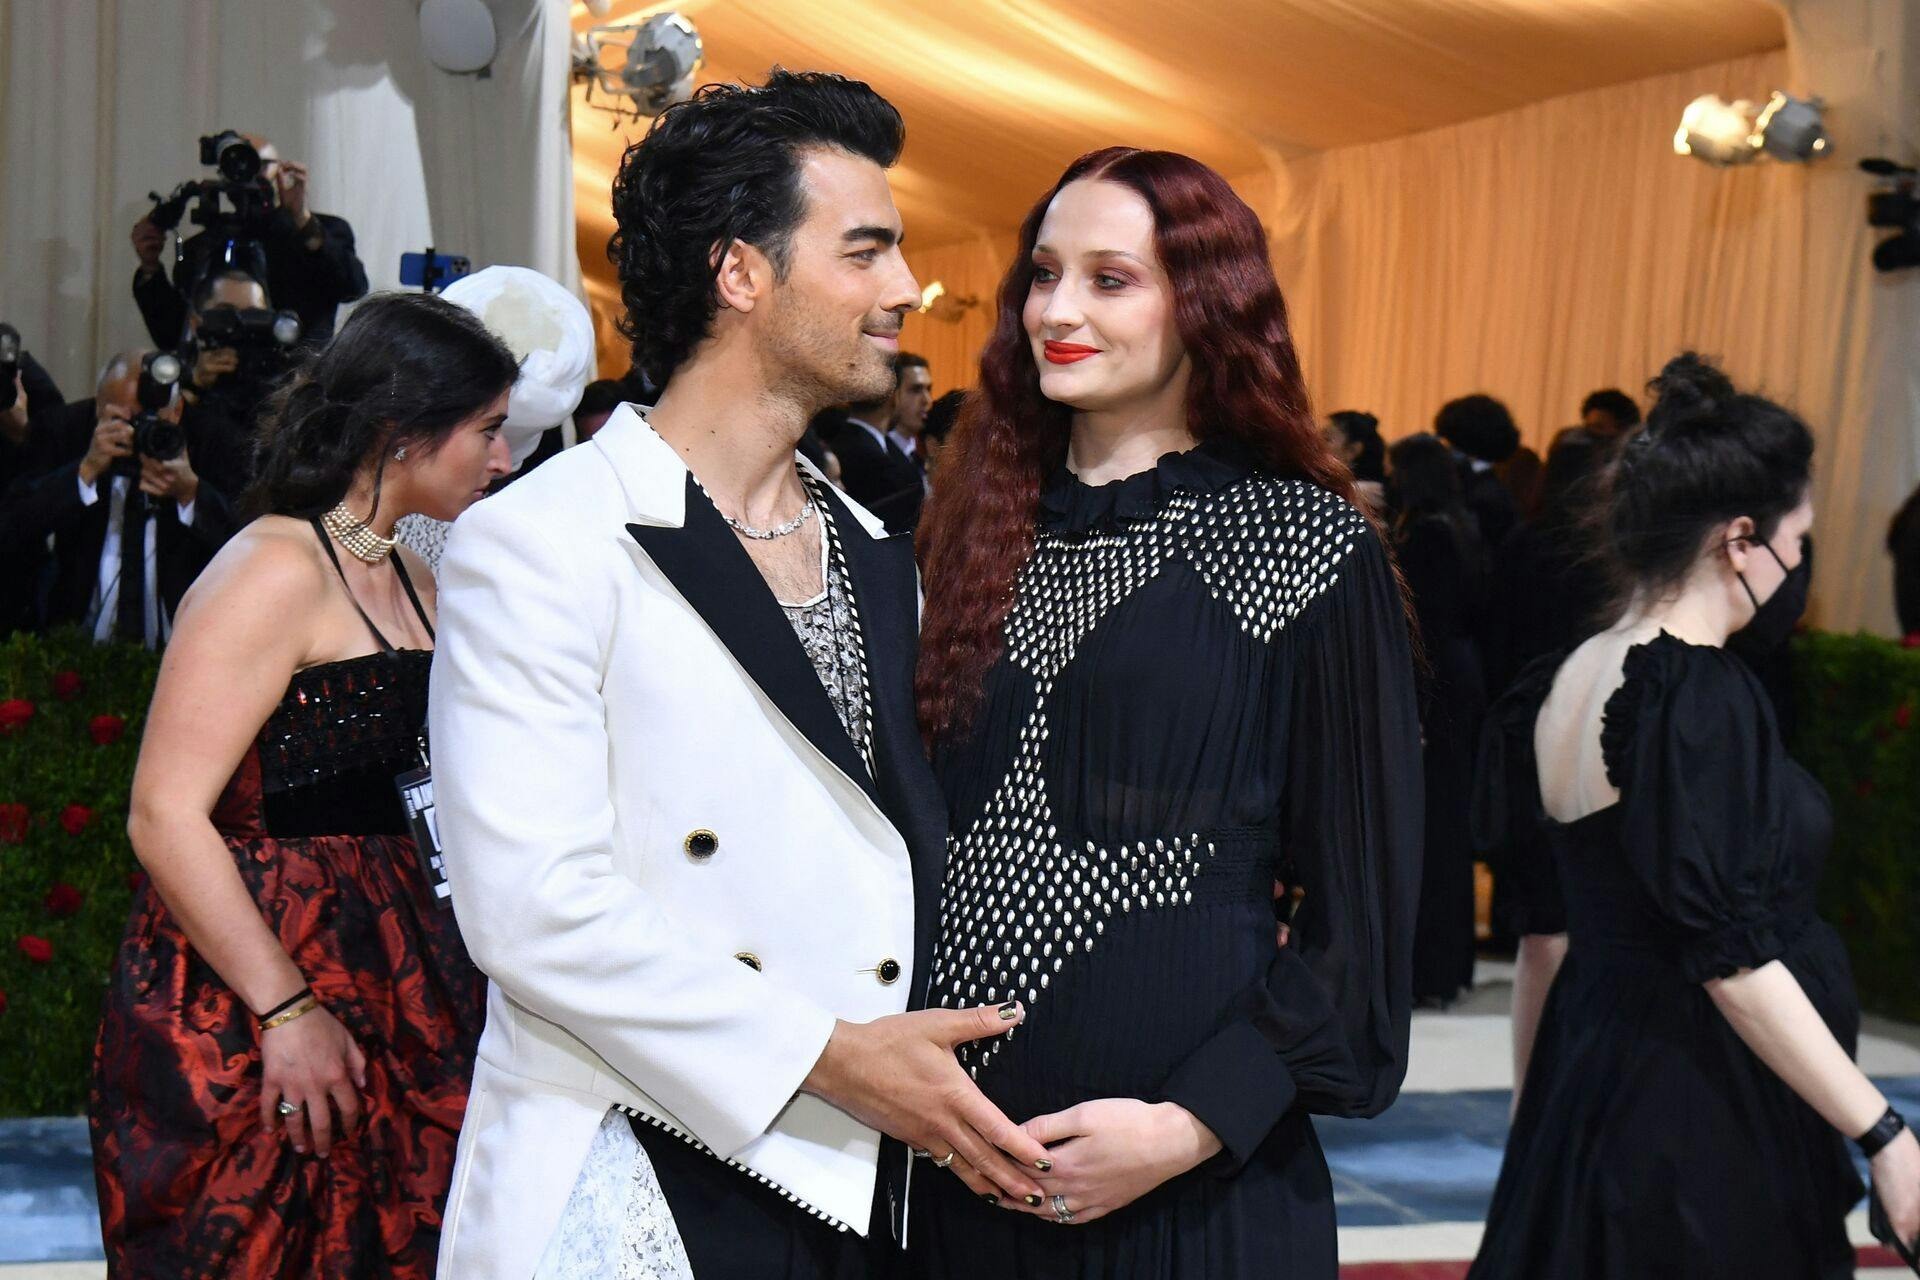 (FILES) US musician-actor Joe Jonas and wife English actress Sophie Turner arrive for the 2022 Met Gala at the Metropolitan Museum of Art on May 2, 2022, in New York. Sepember 5, 2023, Joe Jonas files for divorce from Sophie Turner after 4 years of marriage, the couple have two daughters. (Photo by ANGELA WEISS / AFP)